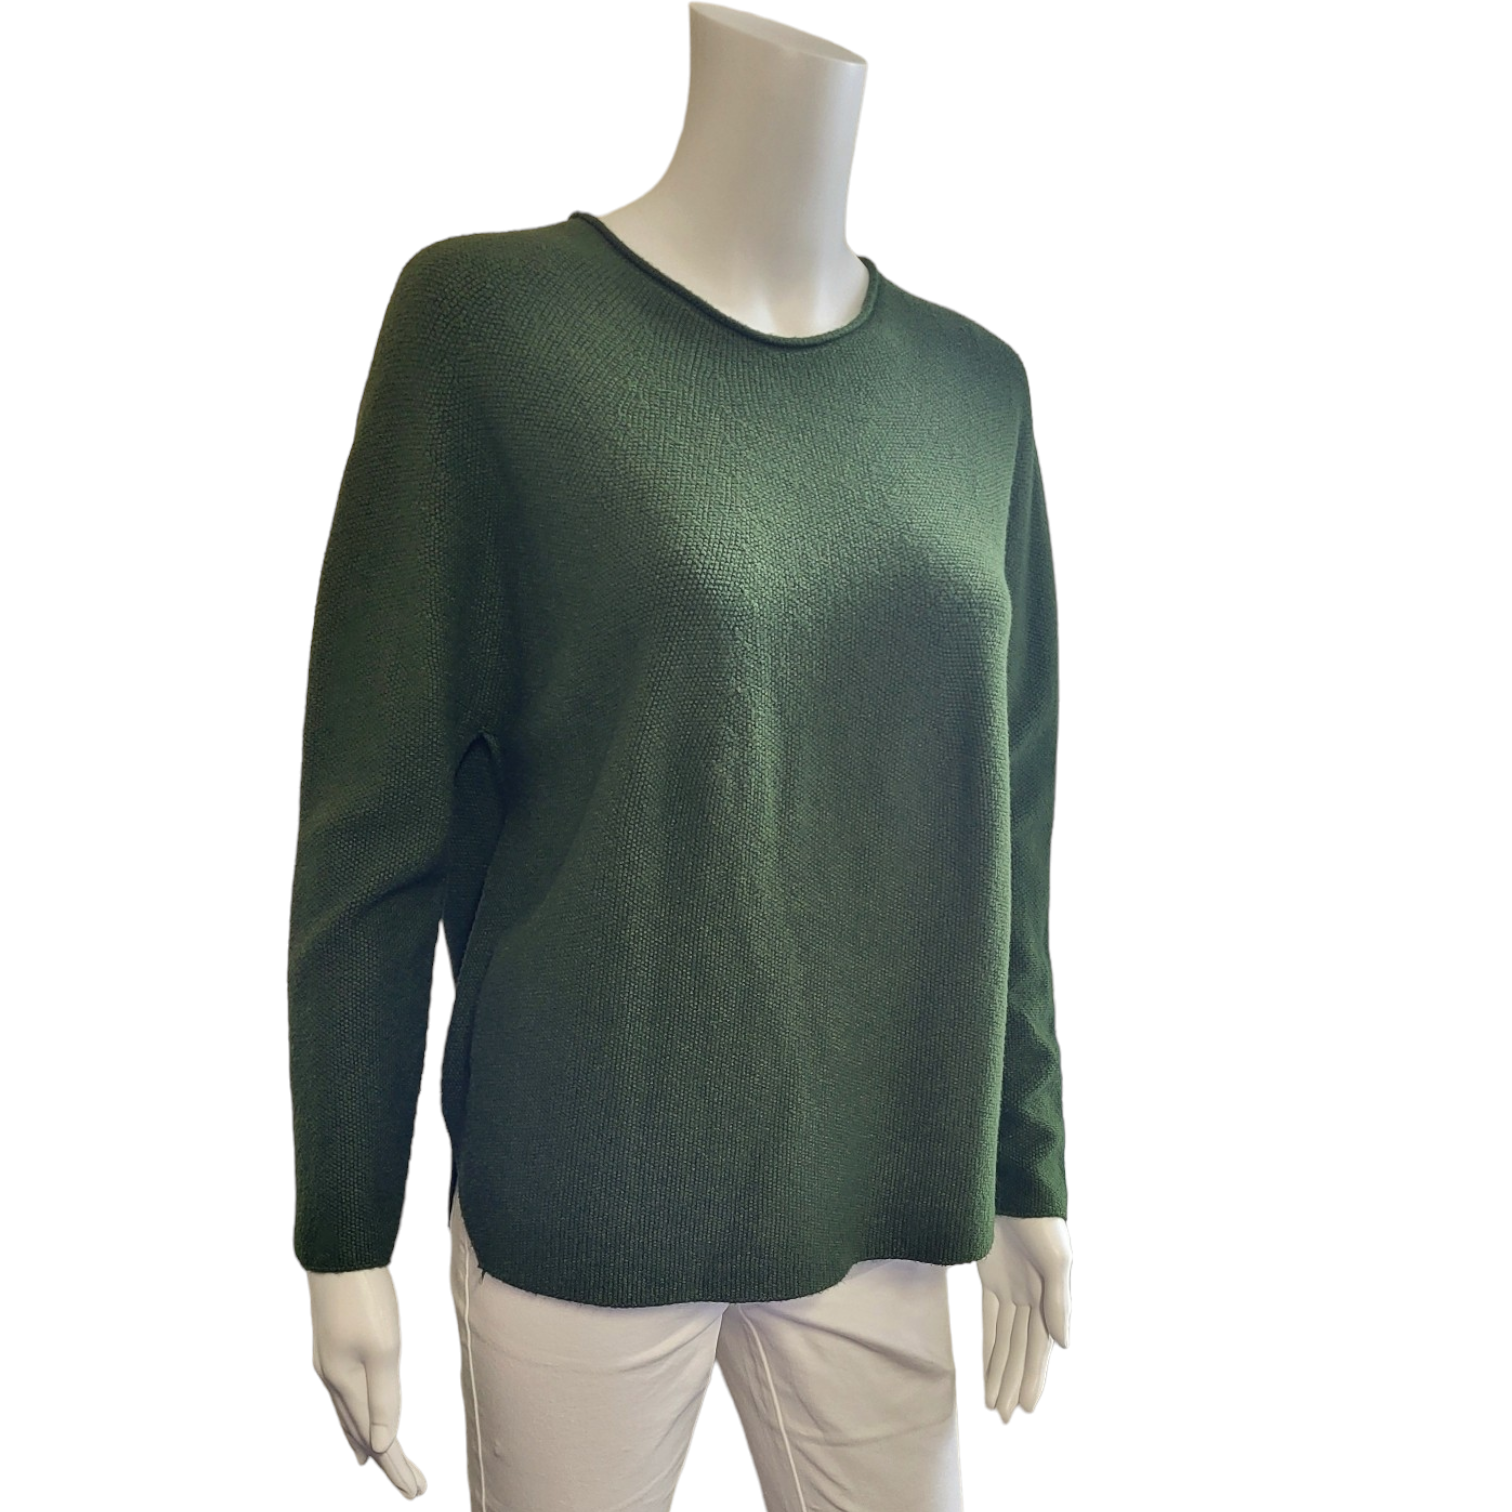 dark green long sleeved jumper with long sleeves and seam back detail